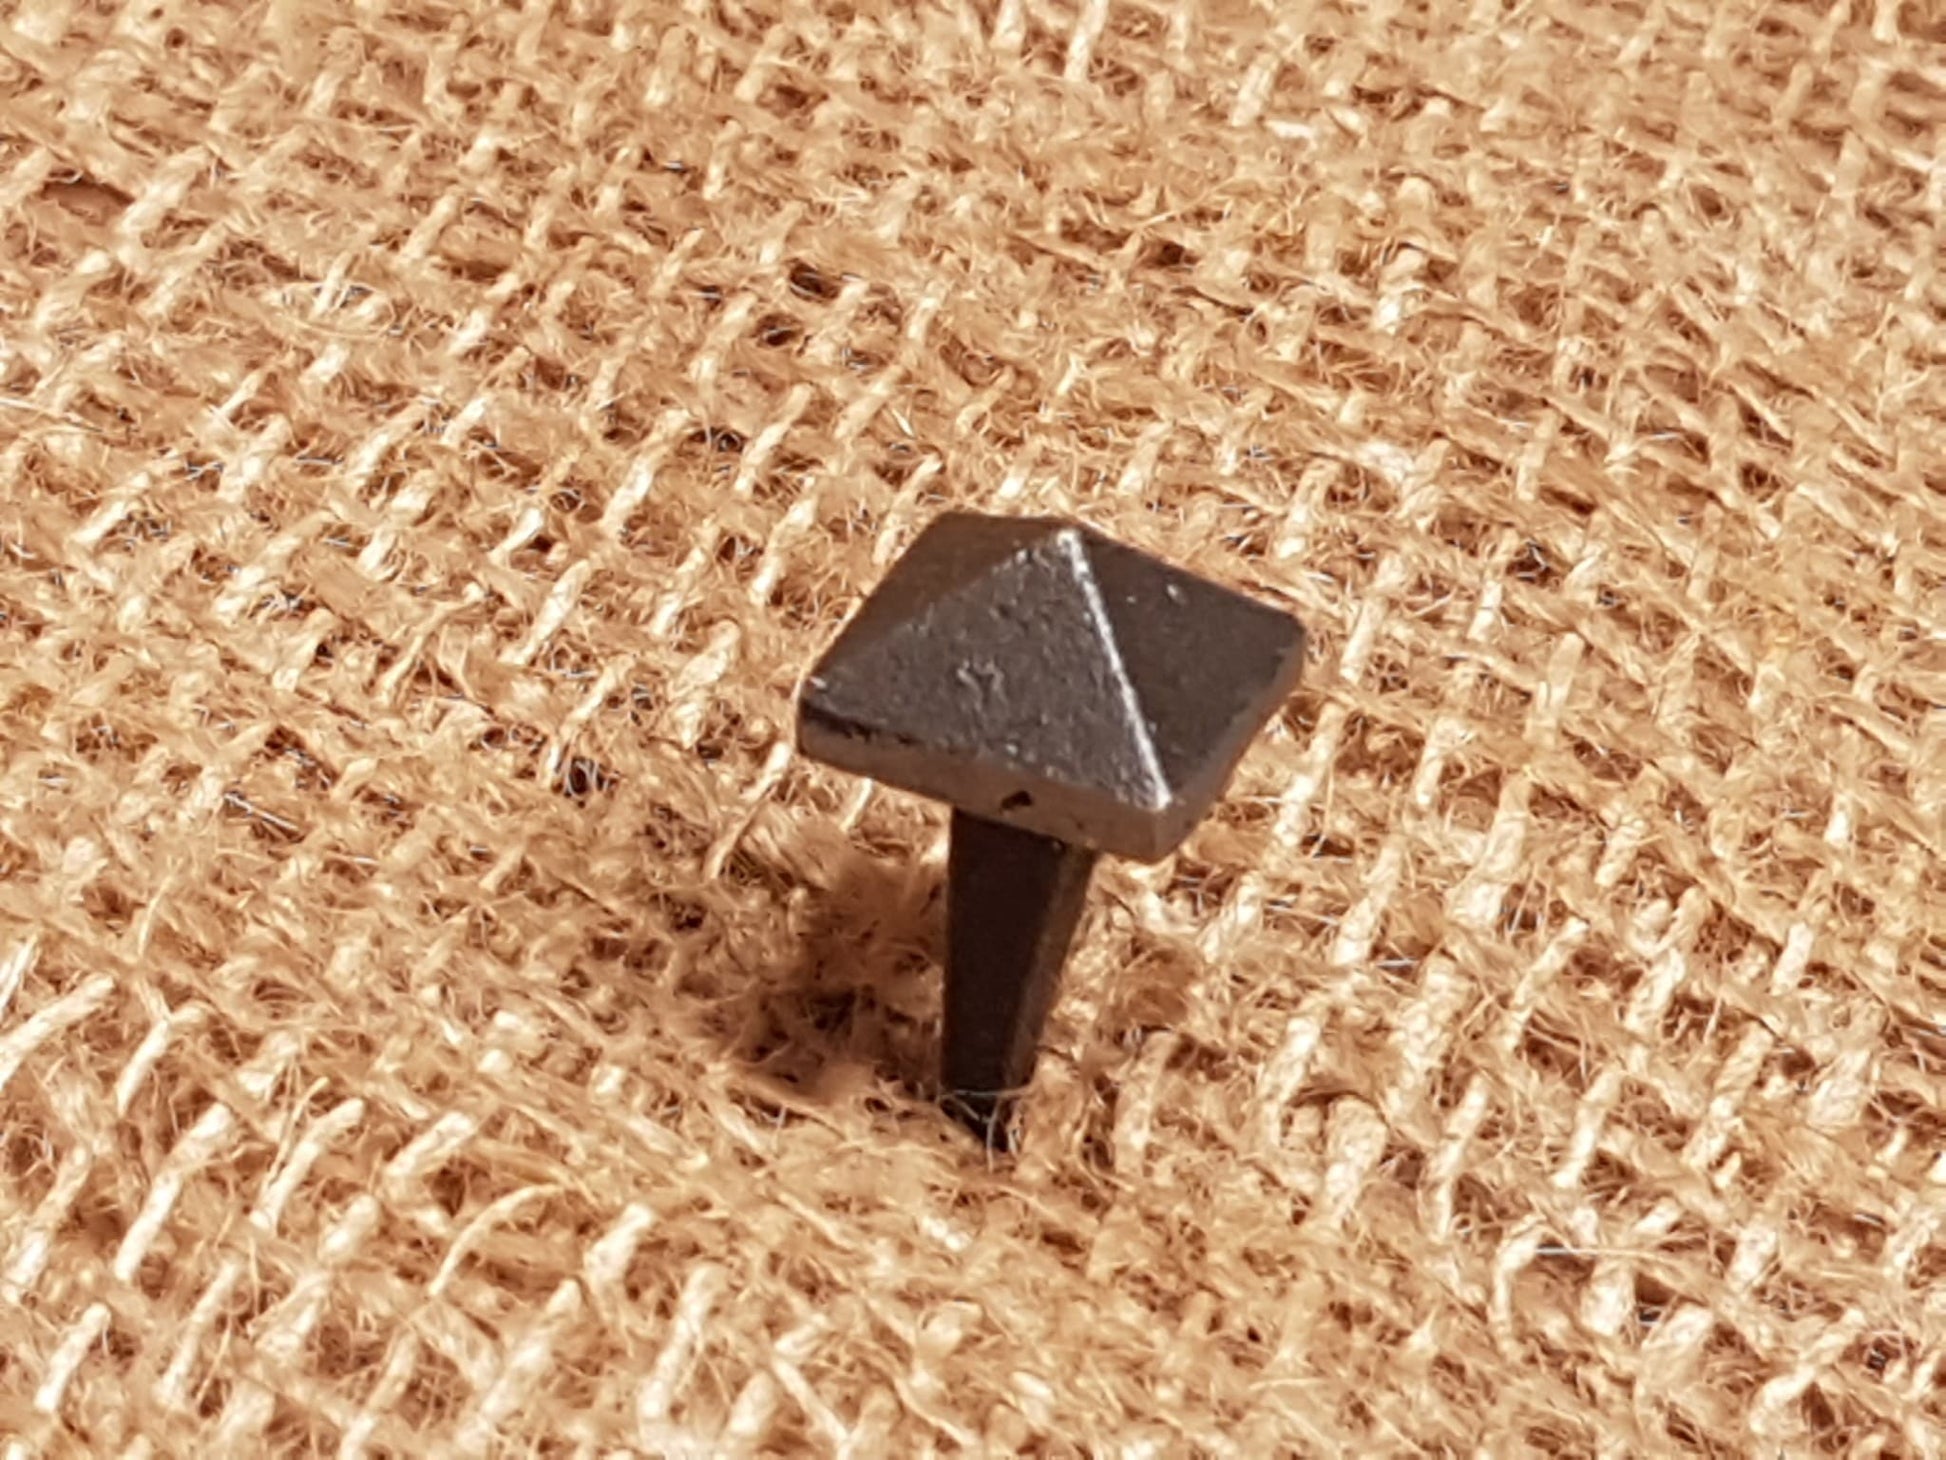 Square Pyramid Stud - Small 1/2" - Spearhead Collection - Nails – Spikes – Studs - Hardware, Millwork Hardware, Nails, Studs